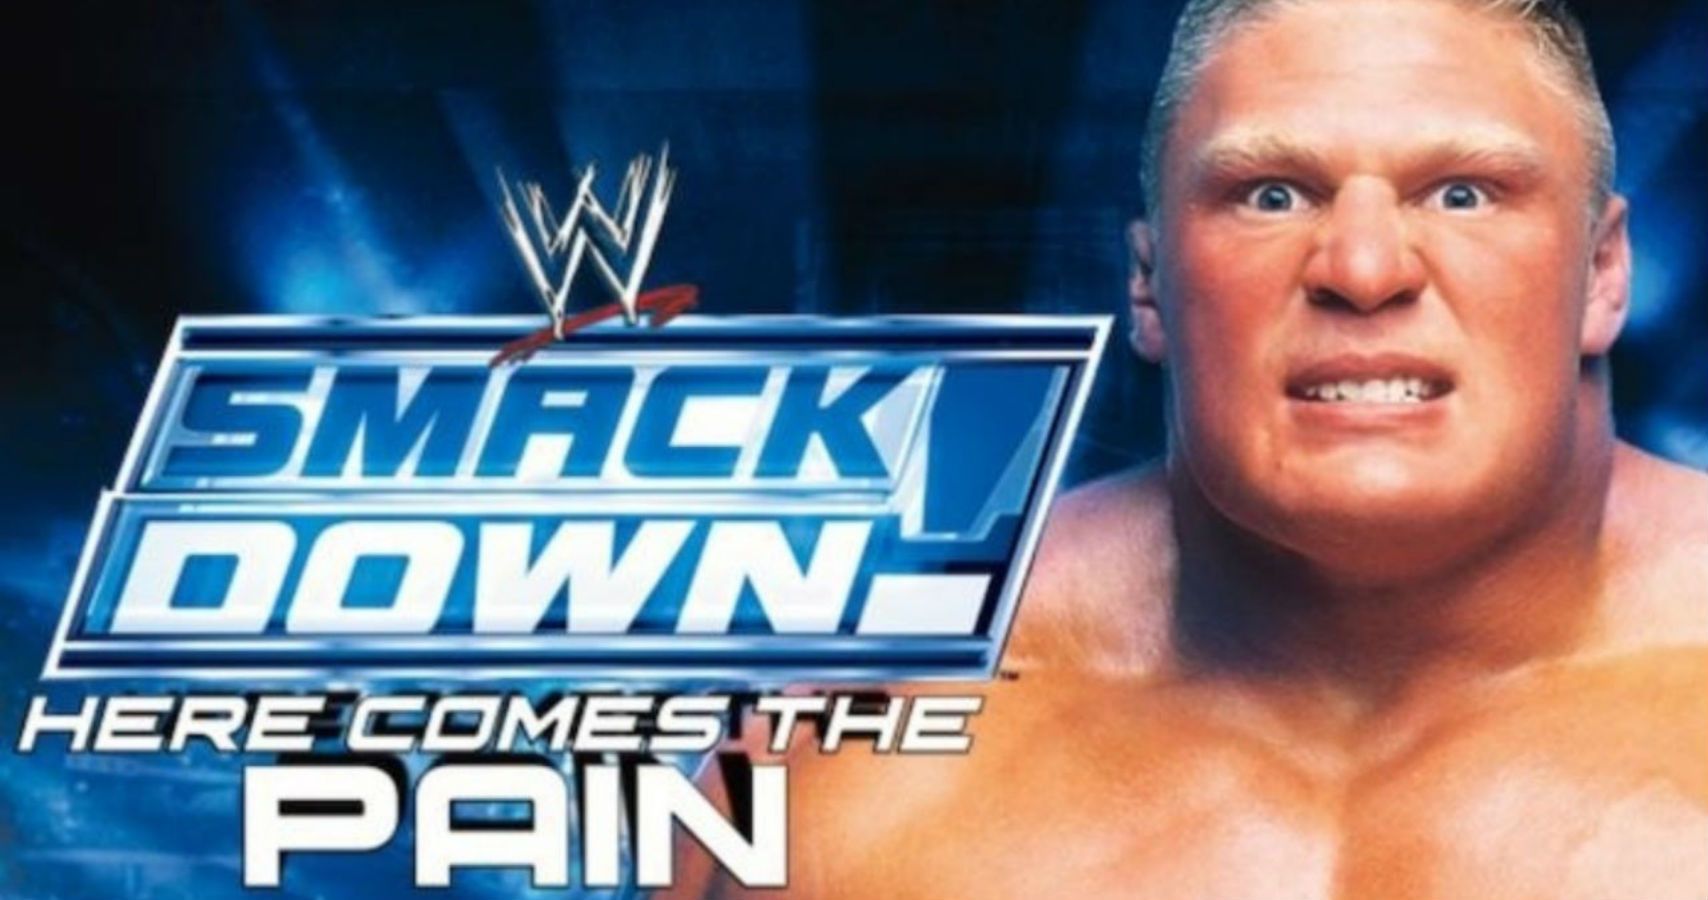 smackdown here comes the pain price